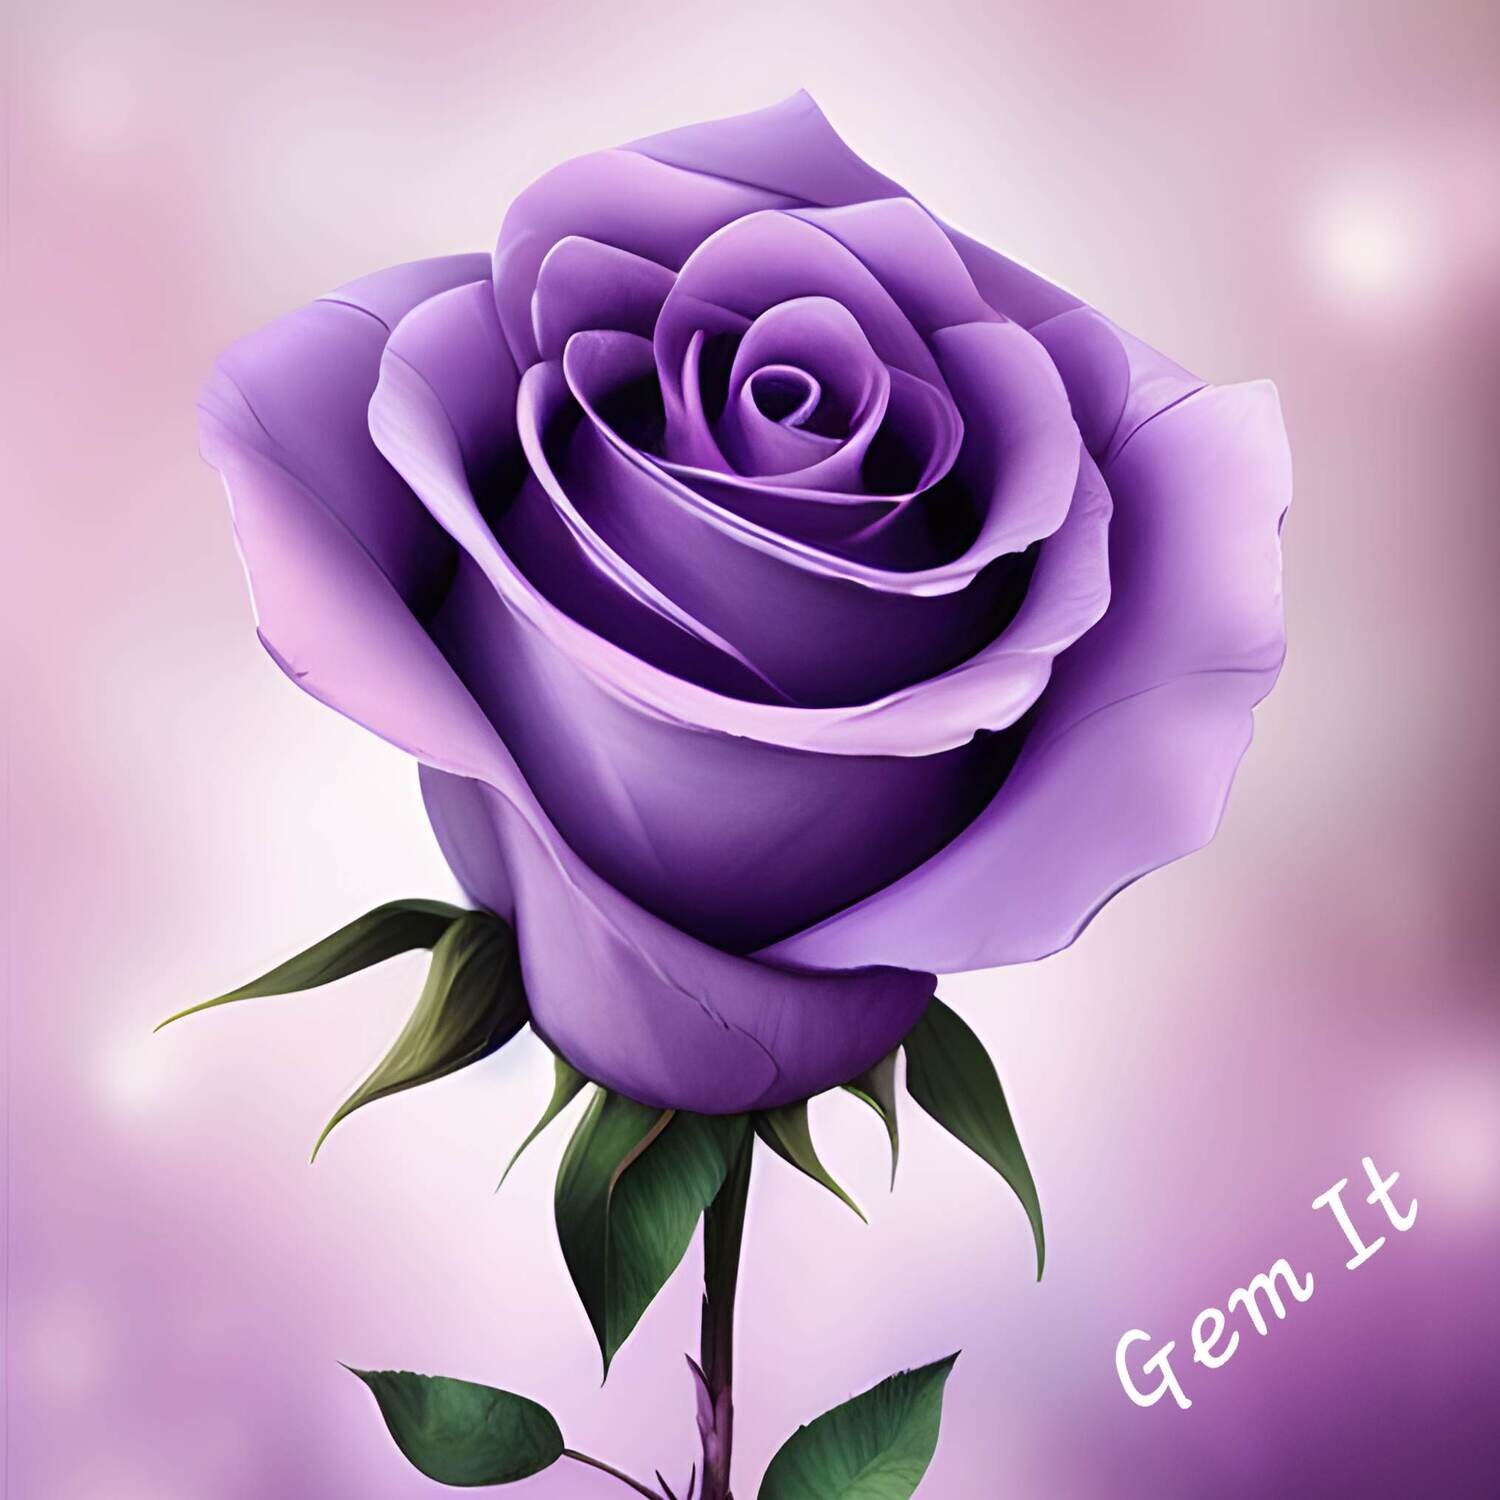 Single Rose Lilac 1 - Specially ordered for you. Delivery is approximately 4 - 6 weeks.